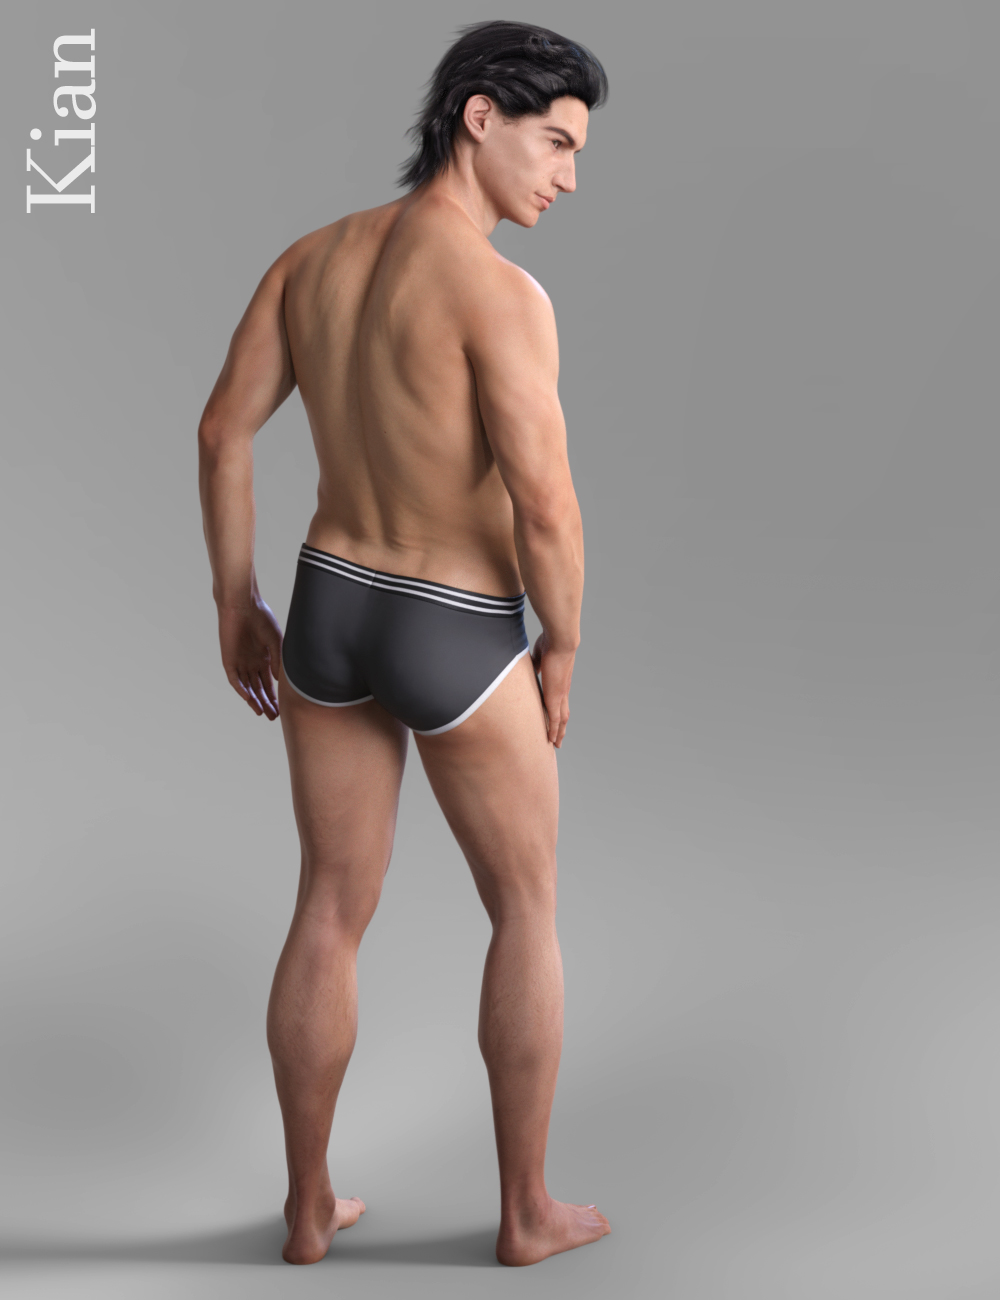 RY Kian for Michael 8 by: Raiyaoutoftouch, 3D Models by Daz 3D